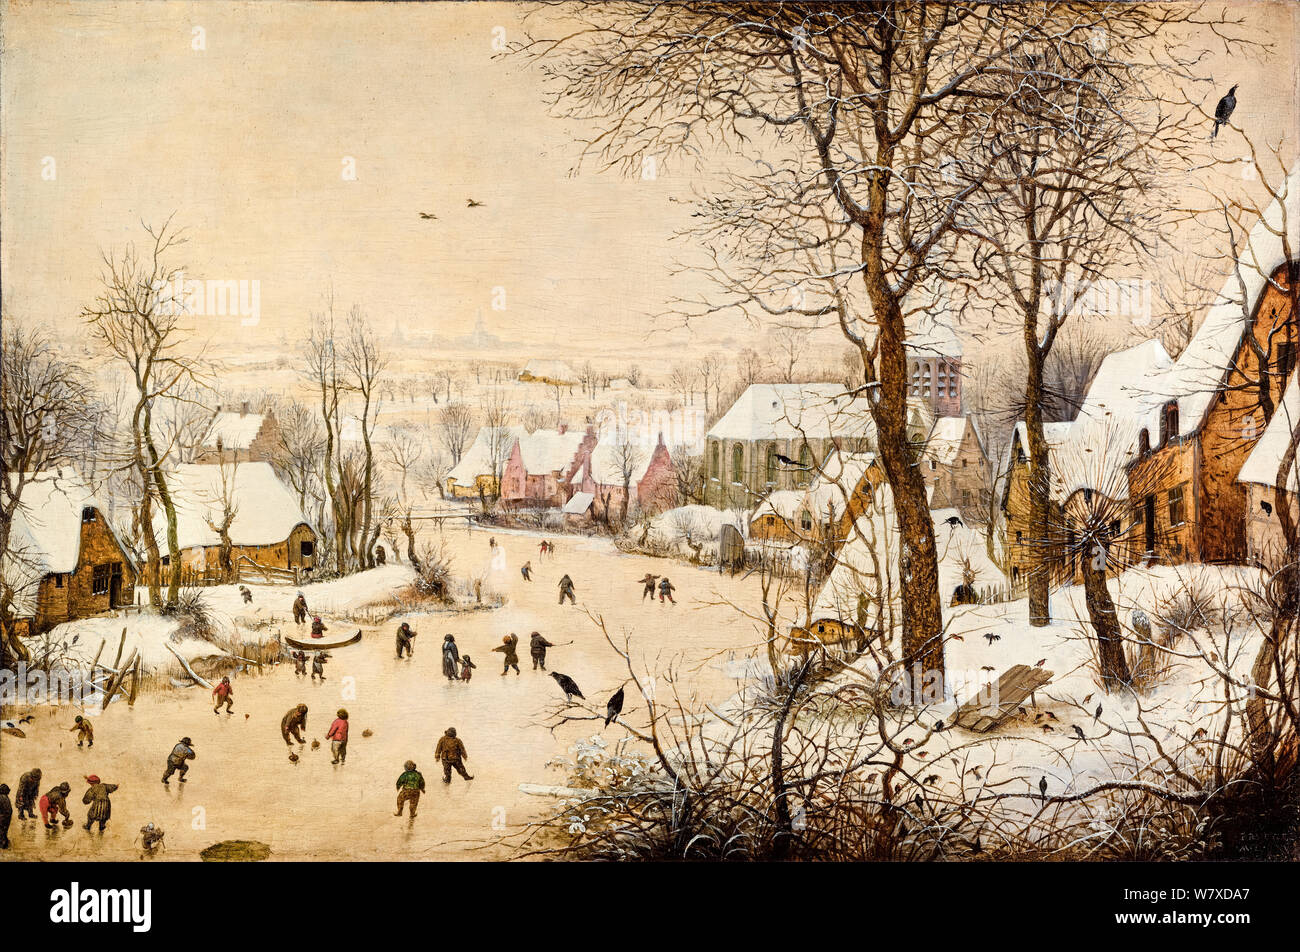 Pieter Bruegel the Elder, painting, Winter Landscape with Skaters and Birds Trap, 1565 Stock Photo